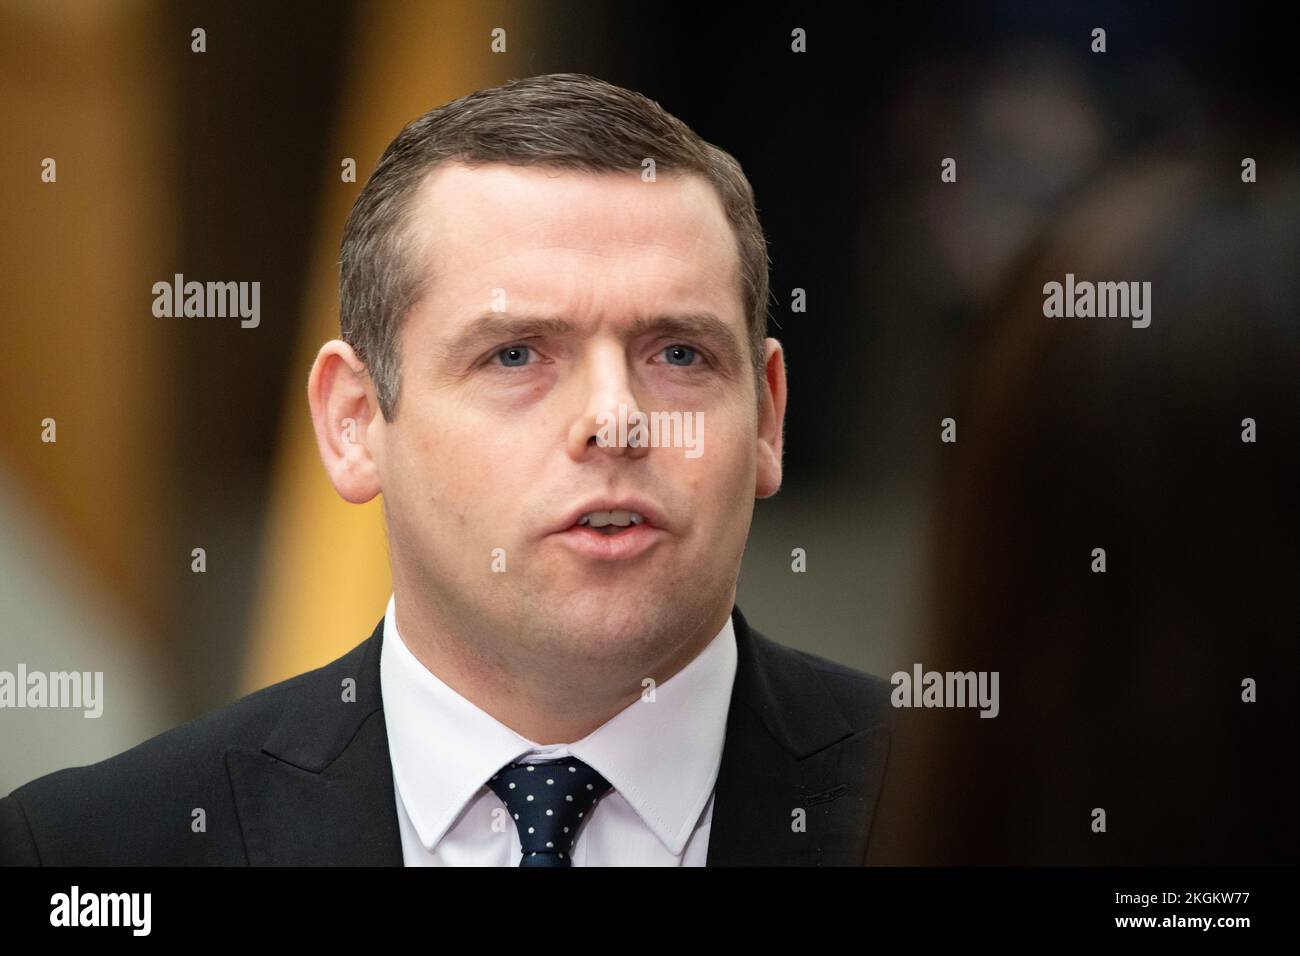 Edinburgh, Scotland, UK. 23rd Nov, 2022. PICTURED: Douglas Ross MP MSP, Leader of the Scottish Conservative and Unionist Party. Pro Union Scottish Party Leaders give their opinions during an interview after the news which broke earlier today the Supreme Court ruling on the legality of the Scottish Parliament not having powers to call a second independence referendum. Credit: Colin D Fisher Credit: Colin Fisher/Alamy Live News Stock Photo